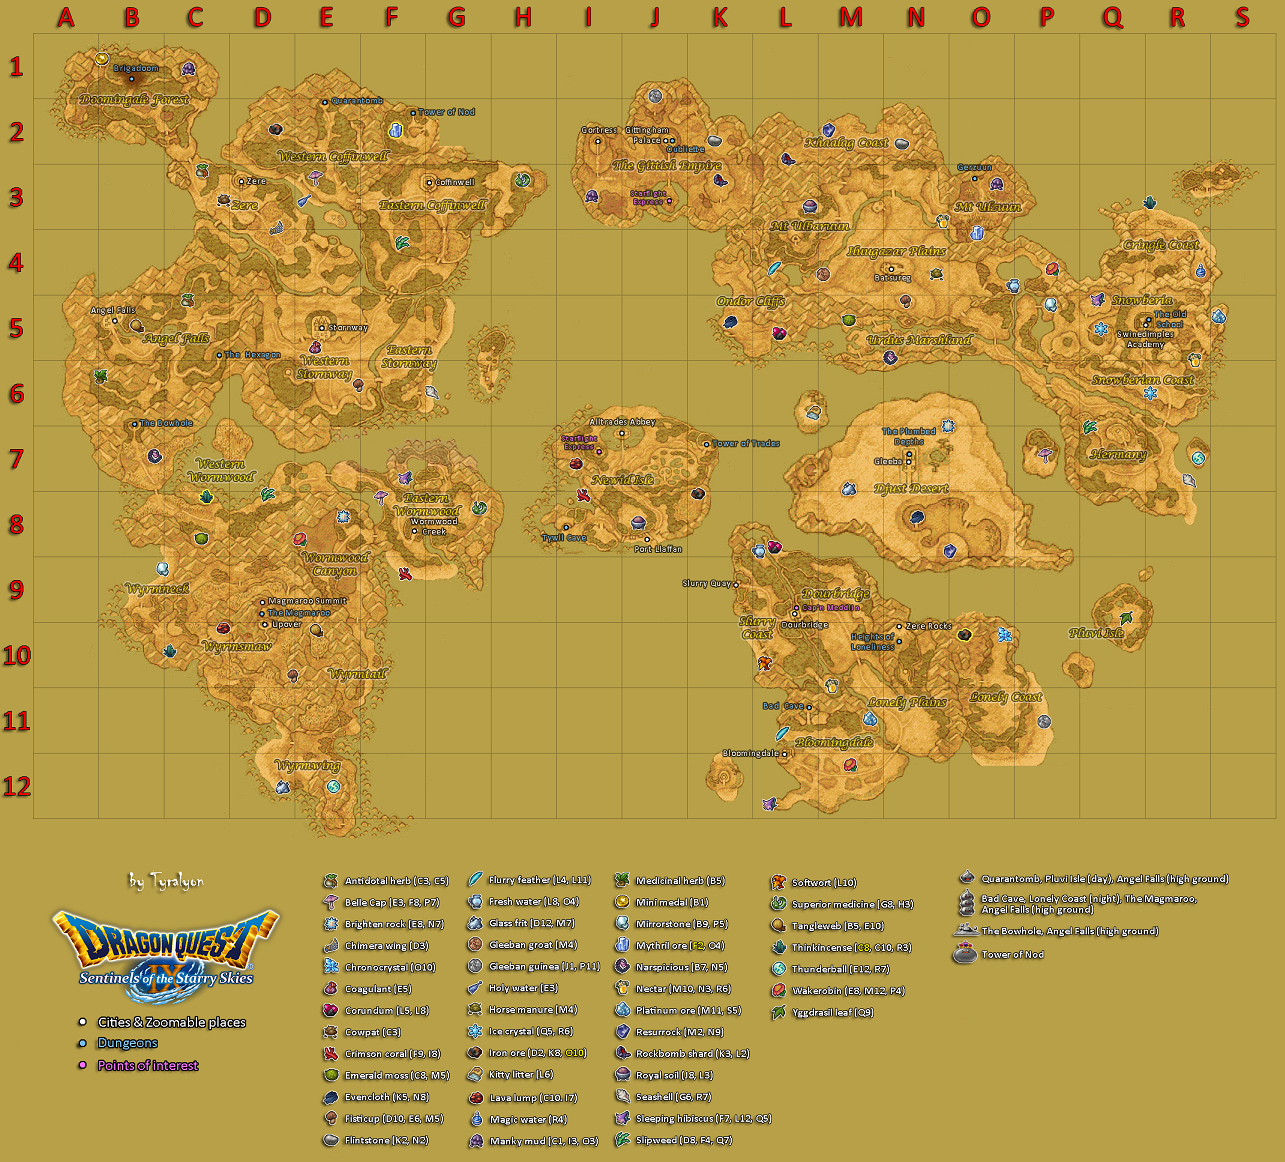 Dragon Quest 11 World Map Locations Map of material locations in Dragon Quest IX | Dragon Quest Wiki 